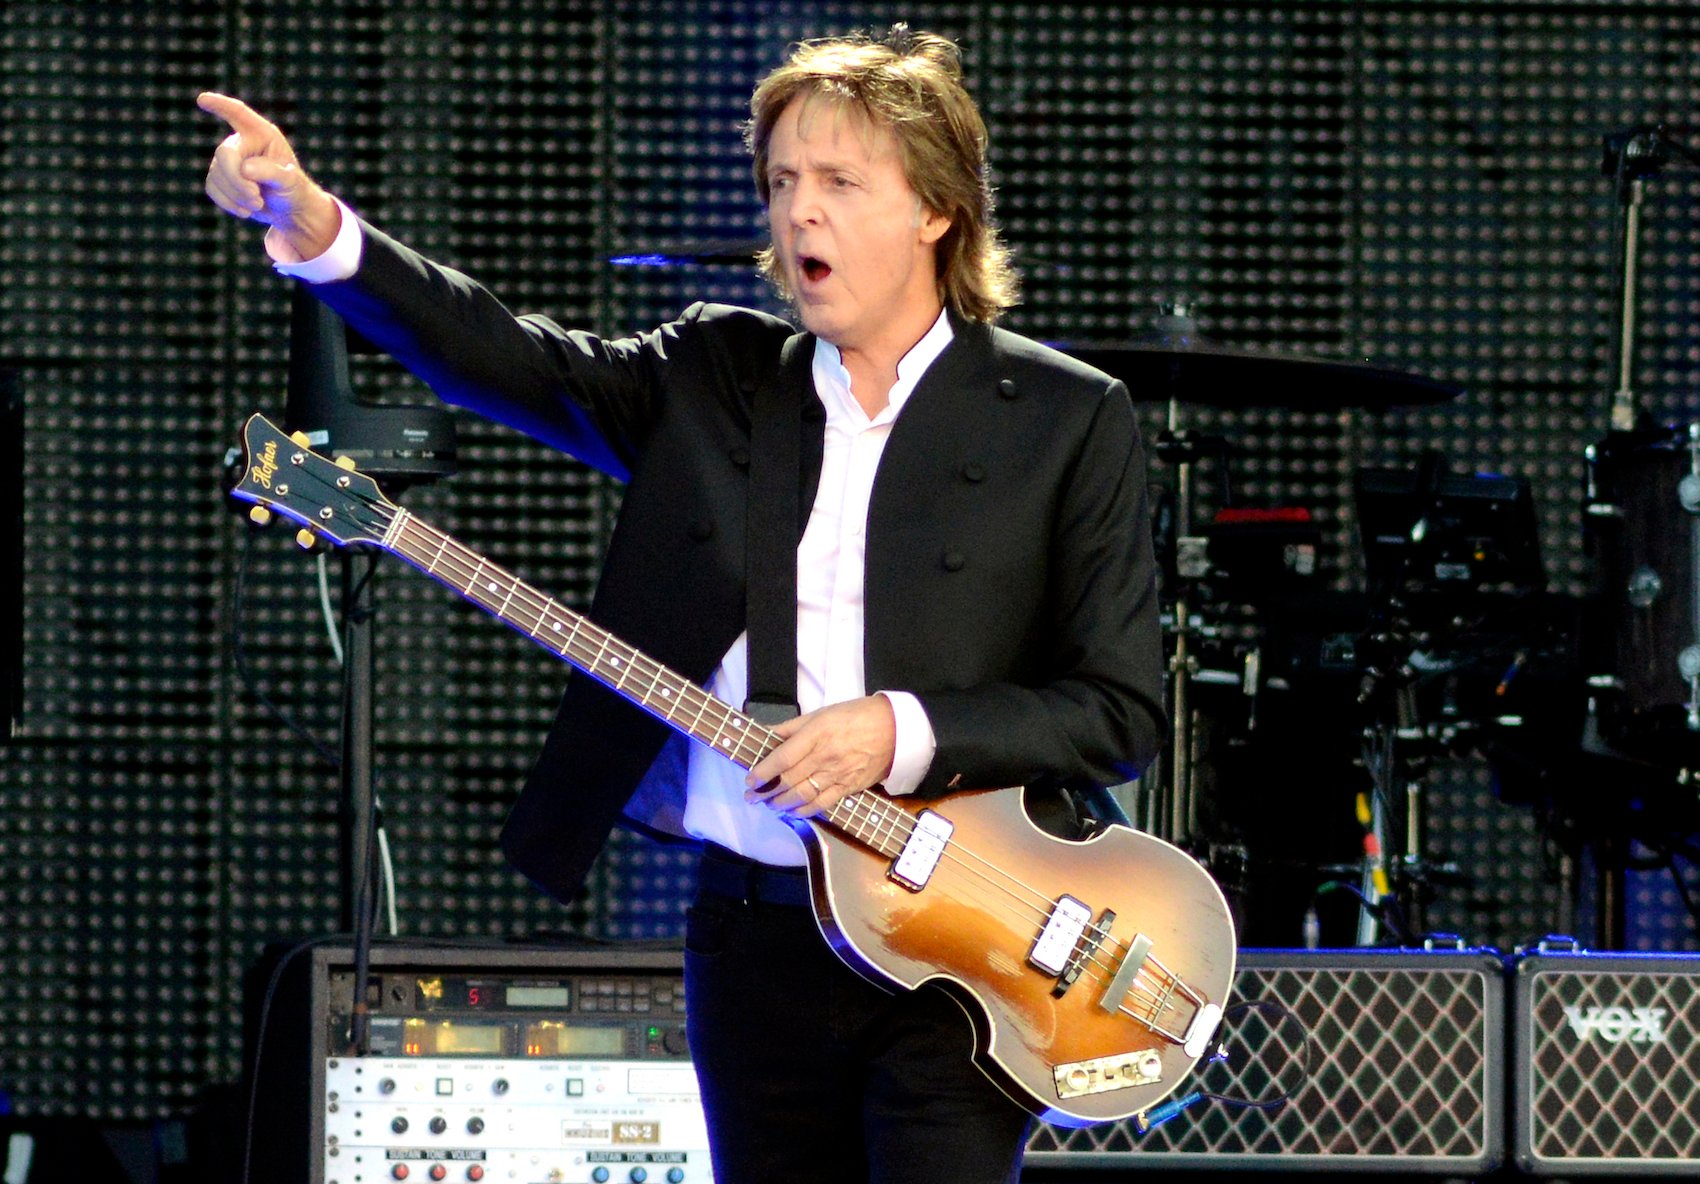 Paul McCartney performs during 2015 Lollapalooza in Chicago, Illinois